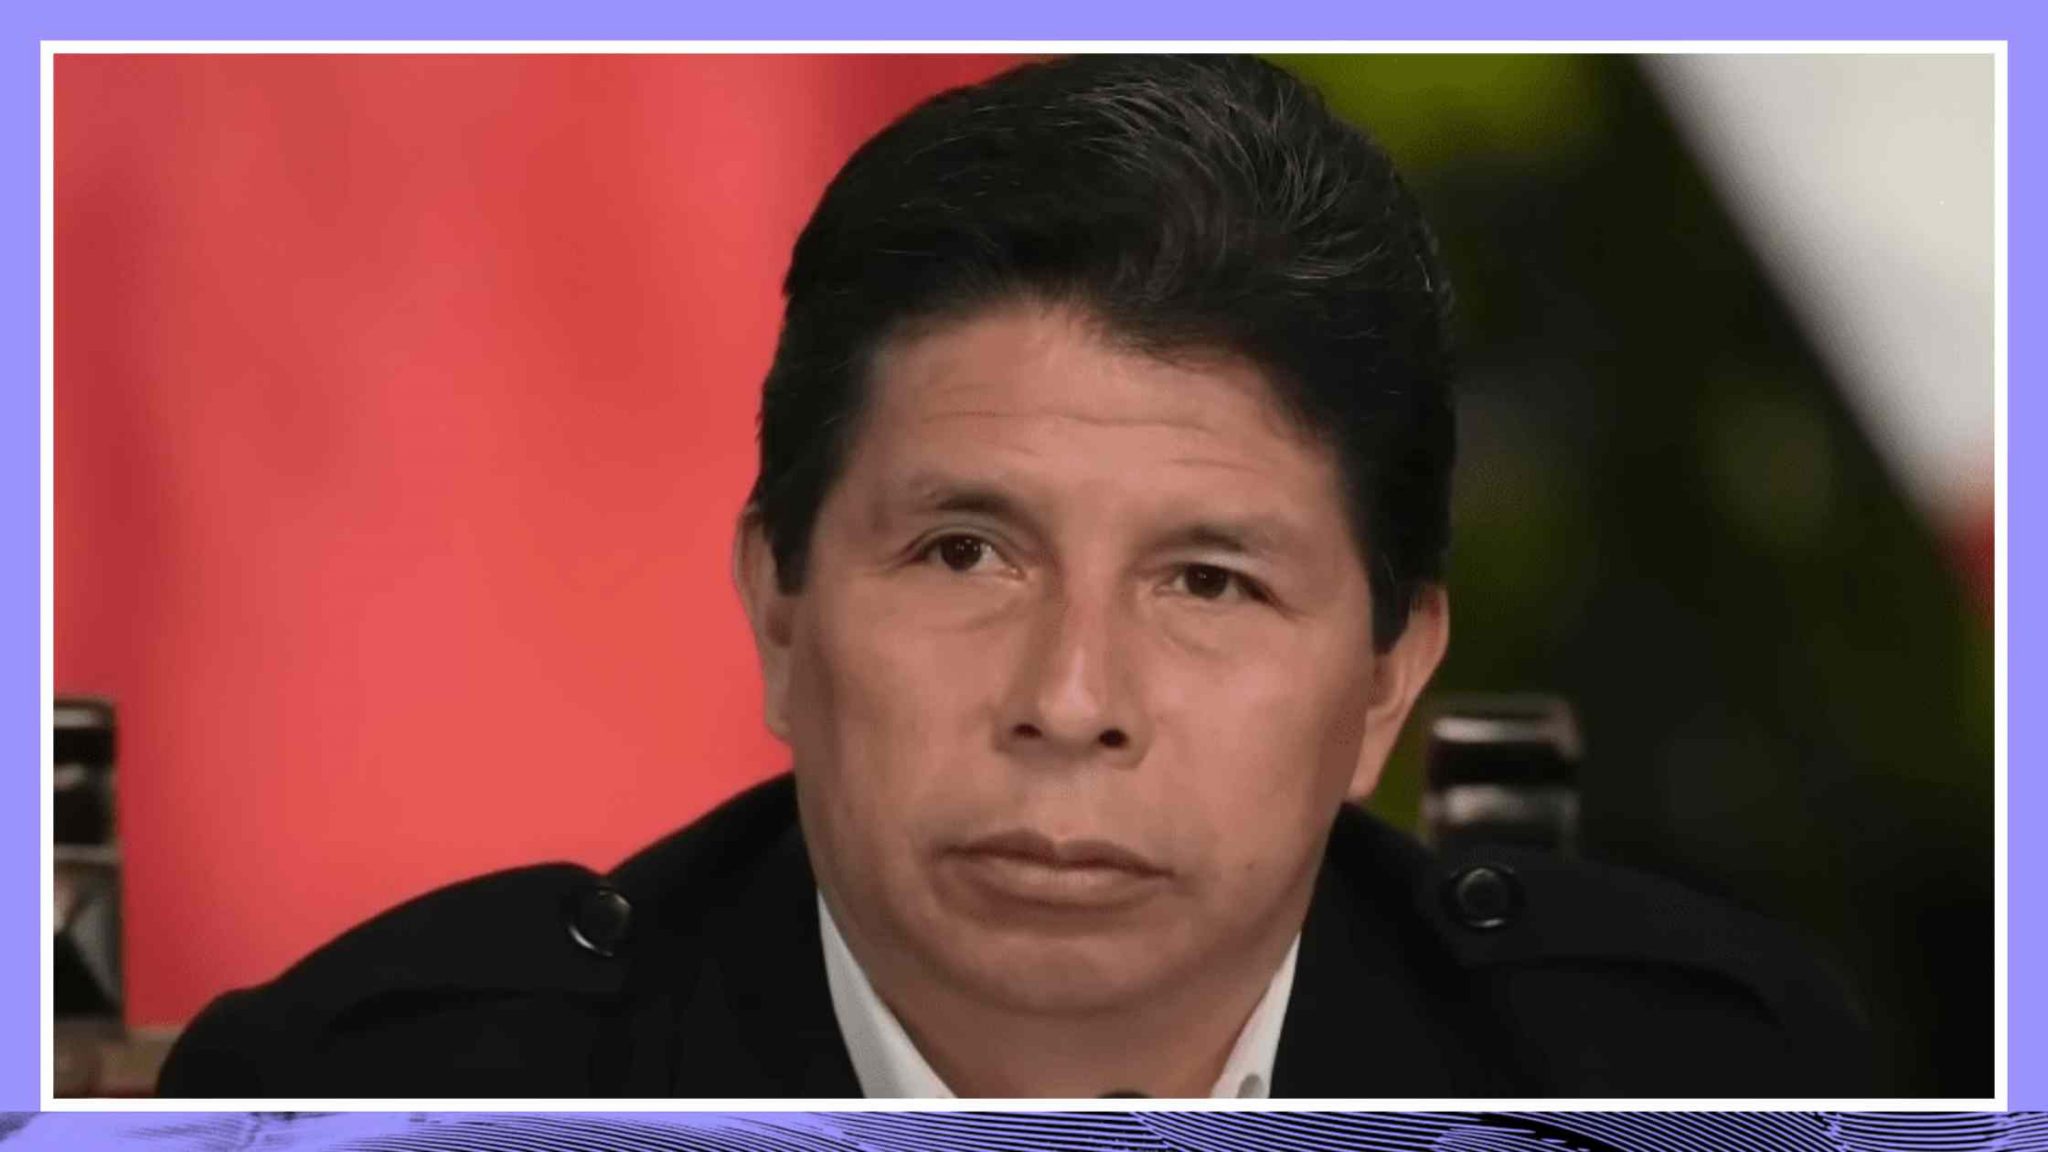 Peruvian President Impeached, Detained Following Attempt To Dissolve Congress Transcript